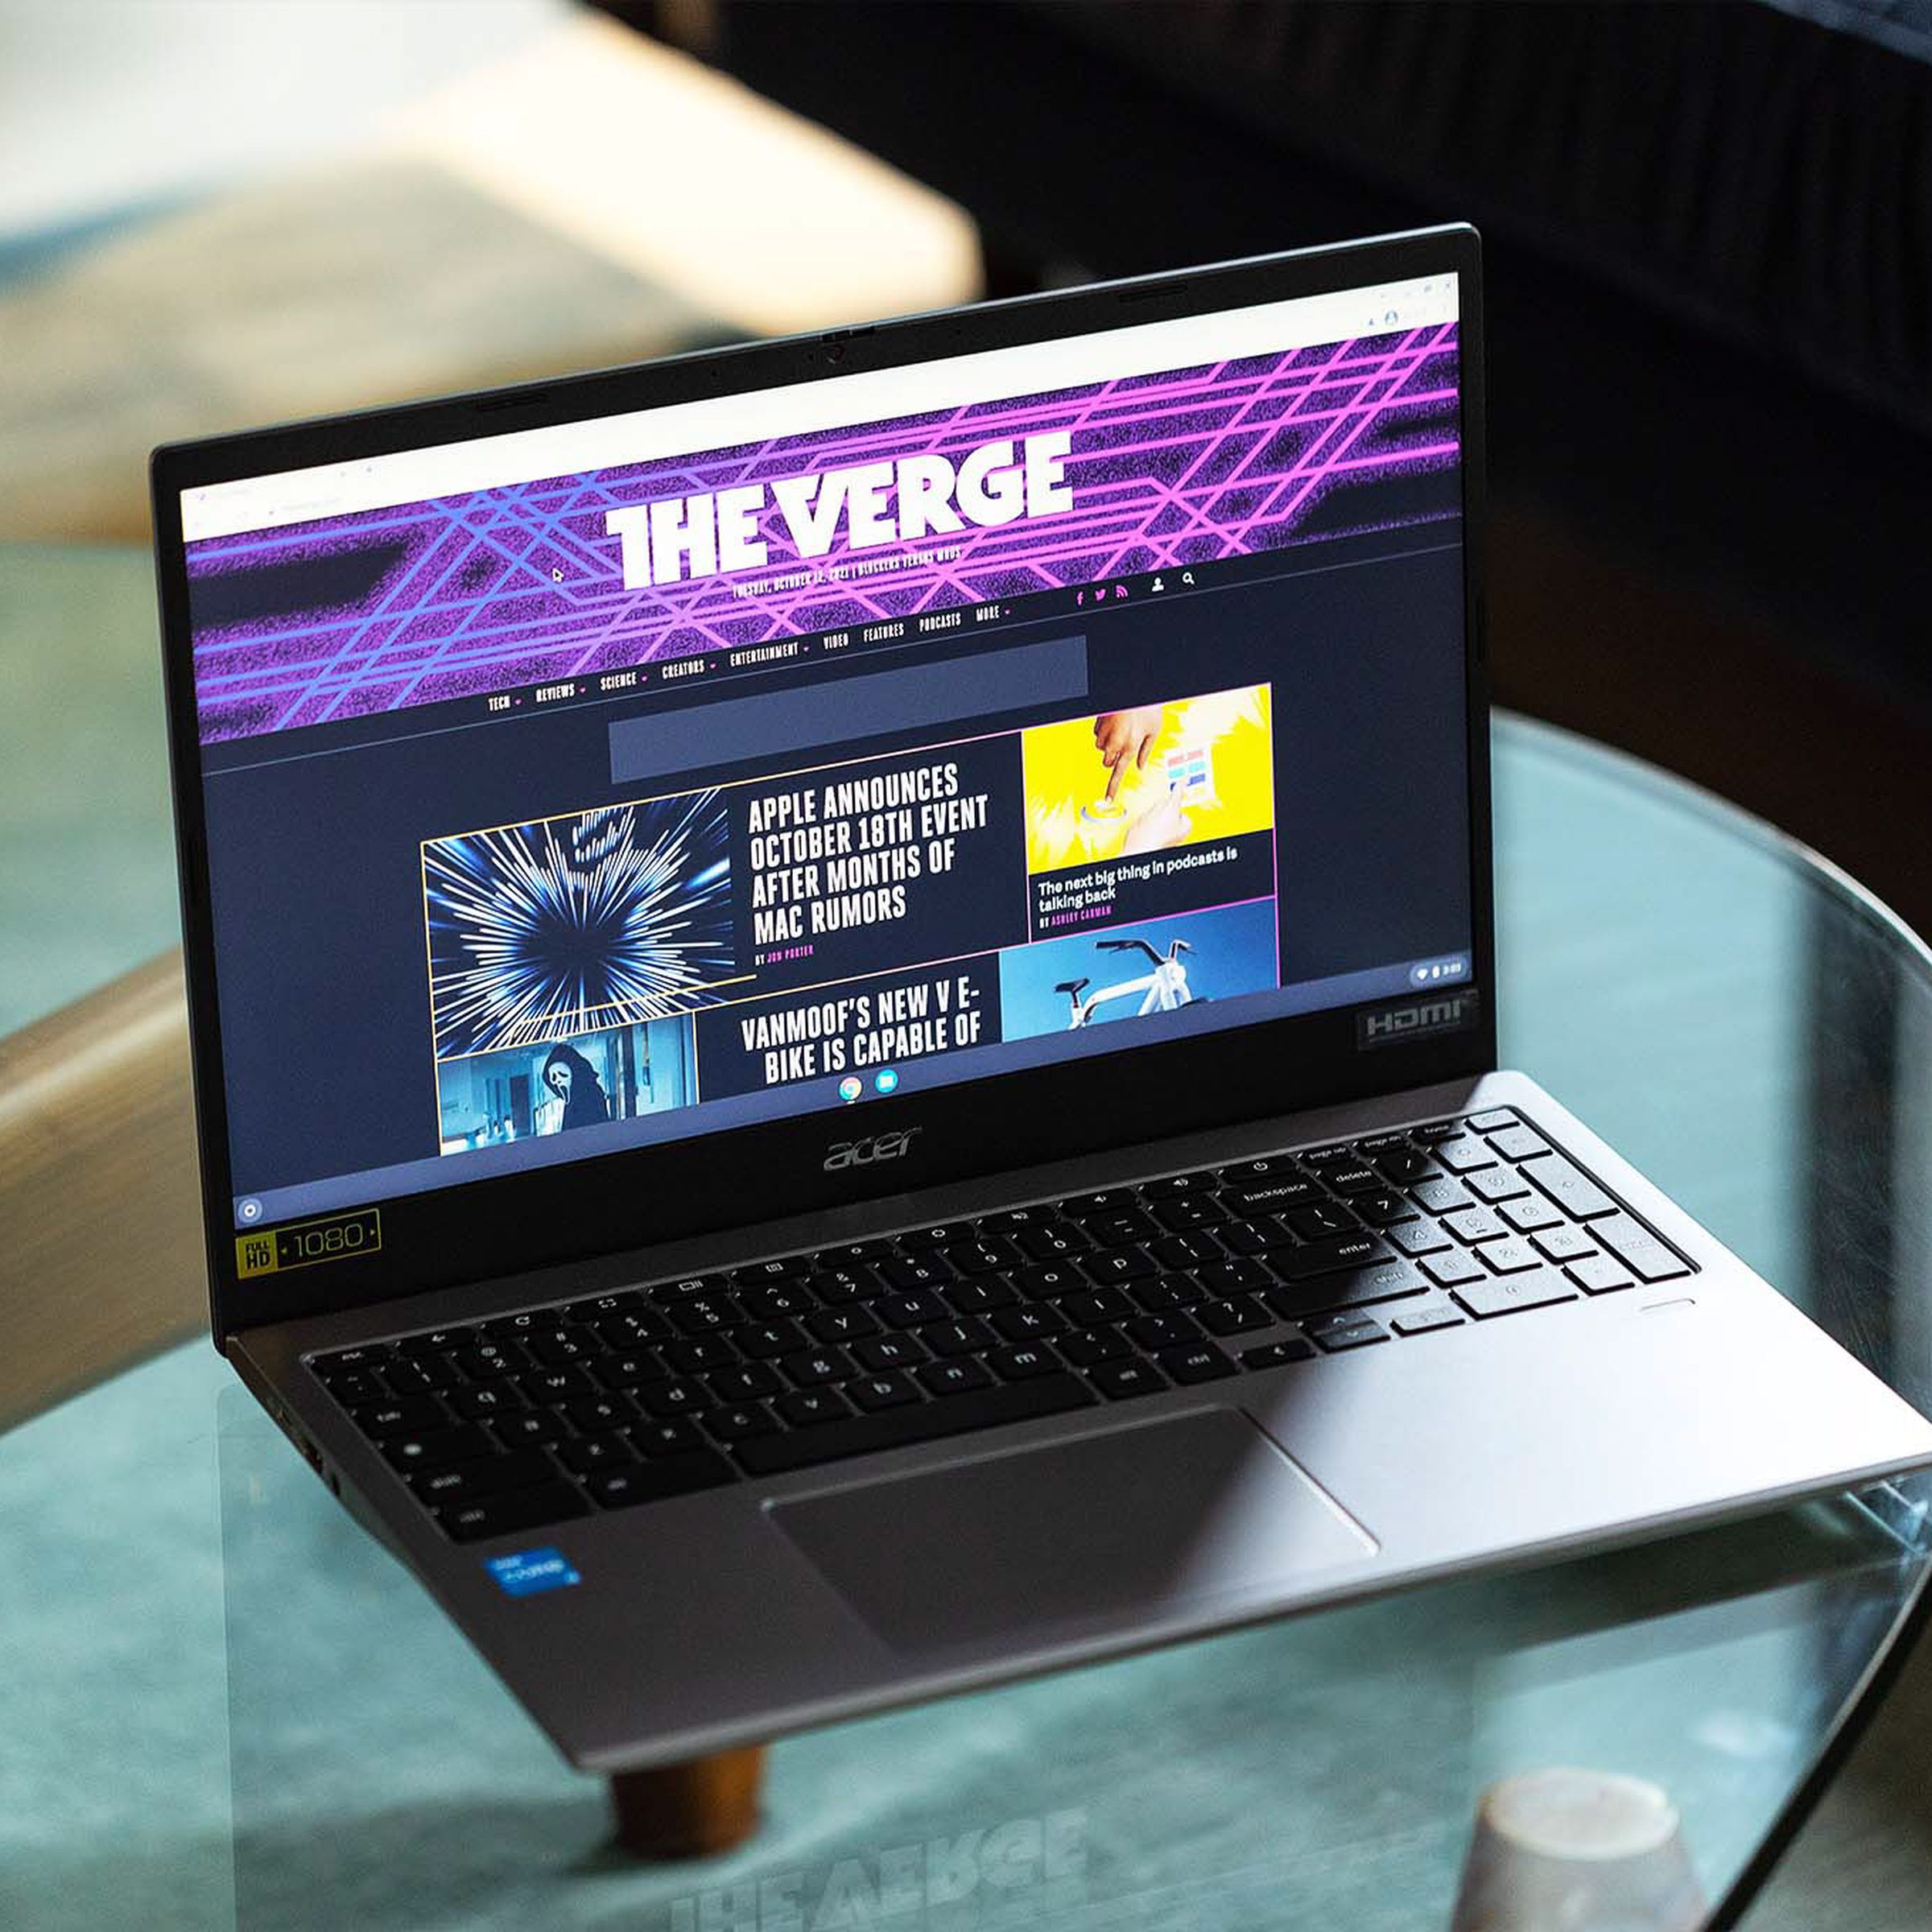 The Acer Chromebook 515 open, to the right, on a clear table. The screen displays The Verge homepage.